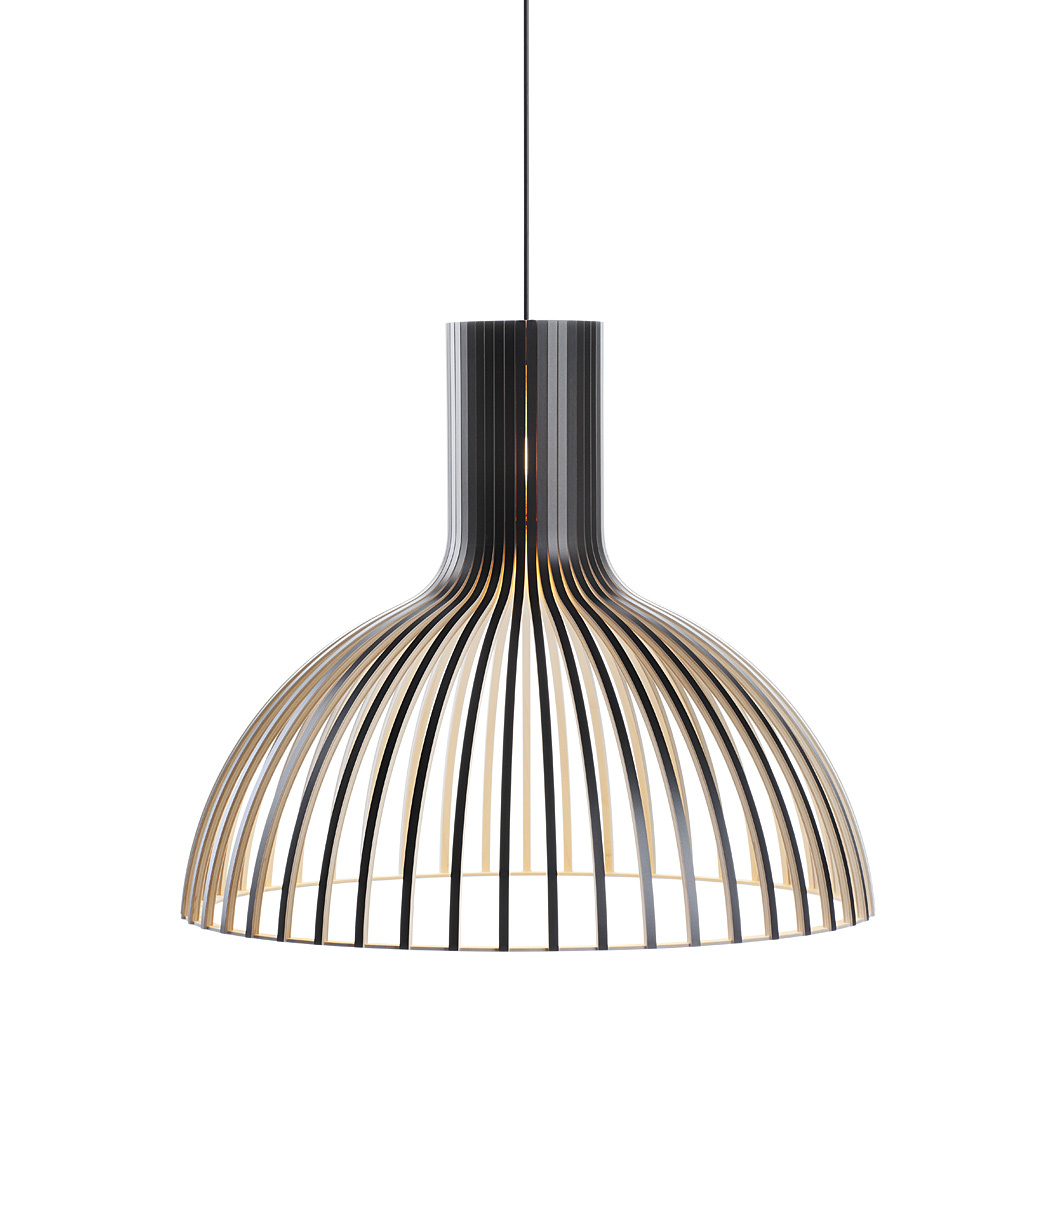 Victo 4250 pendant lamp is available in black laminated